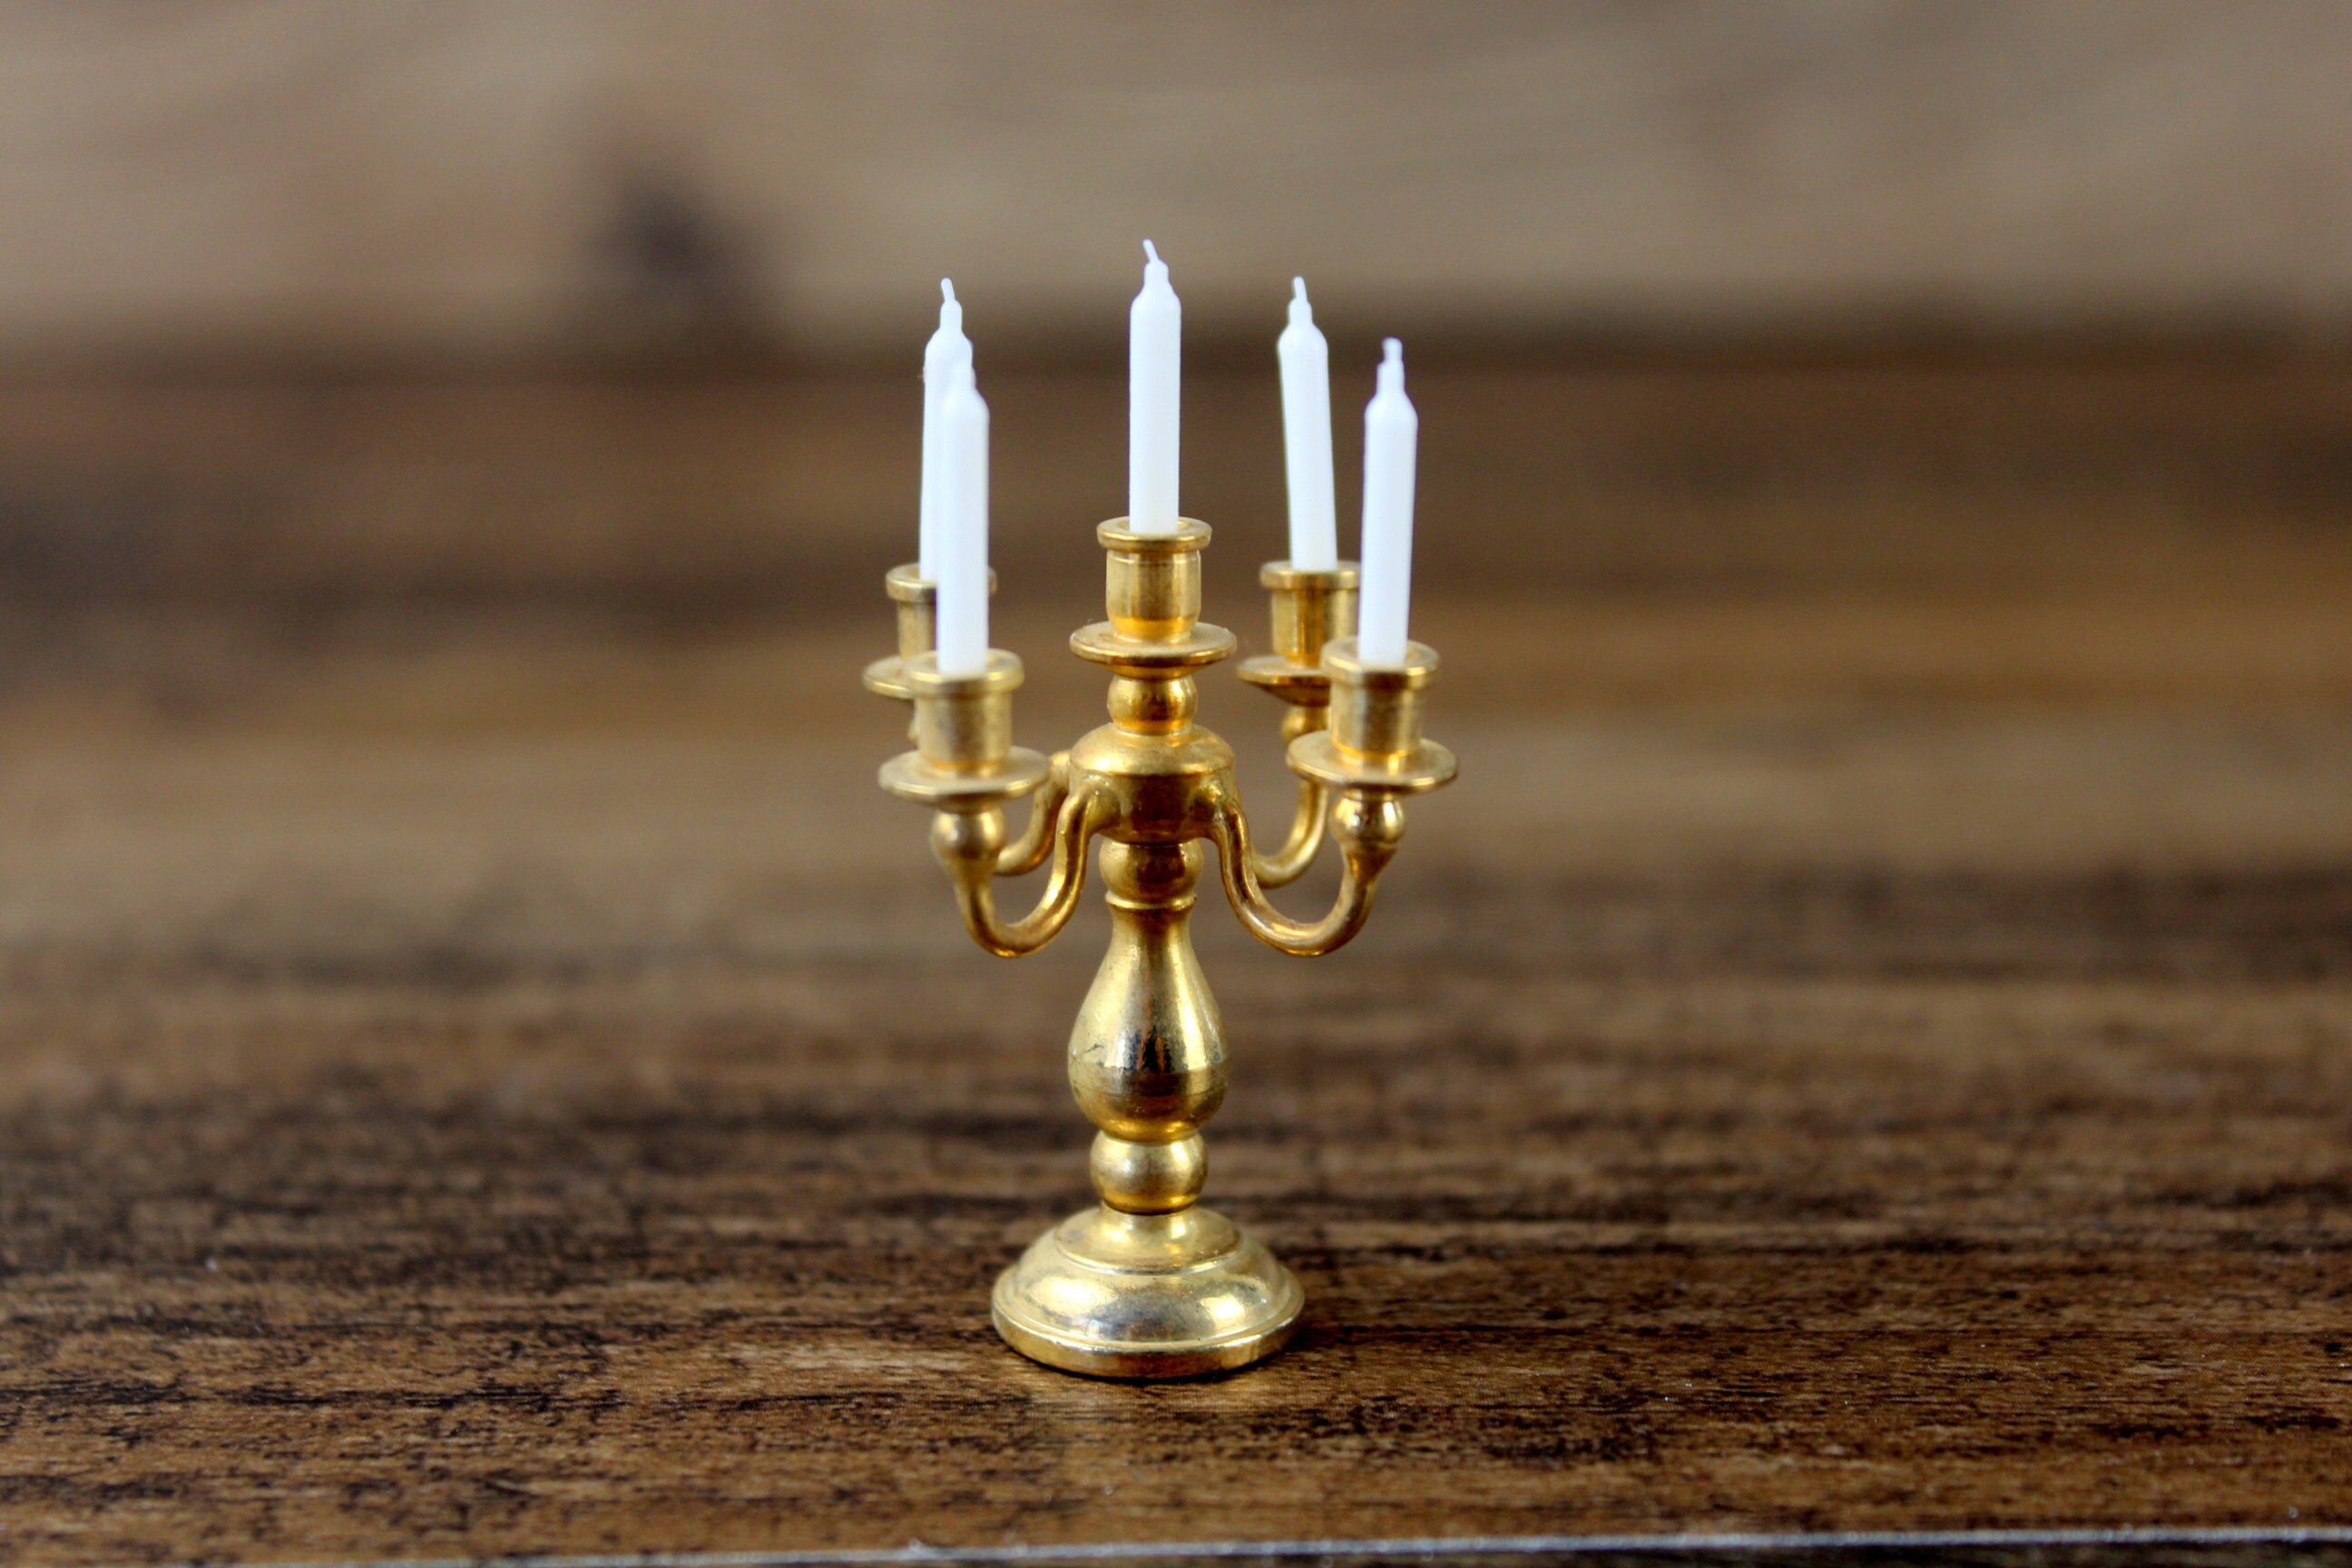 Odoria 1:12 Miniature 1 Pair Golden Candle Stand Dollhouse Decoration Accessories 